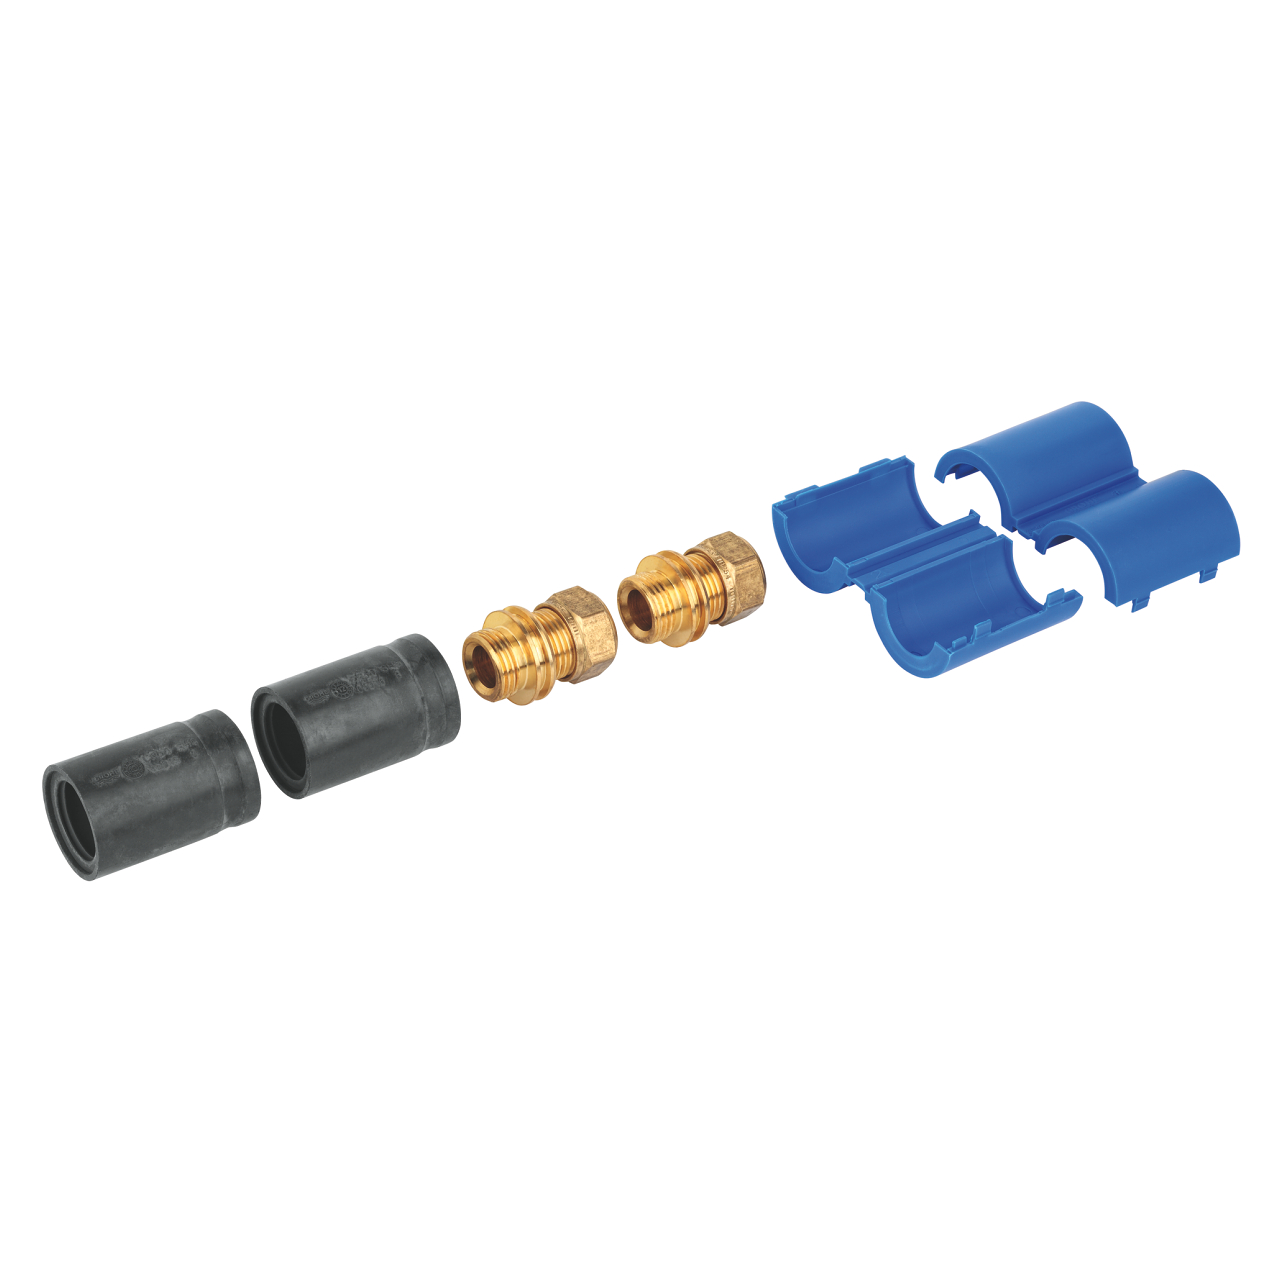 GROHE Rapido connection set